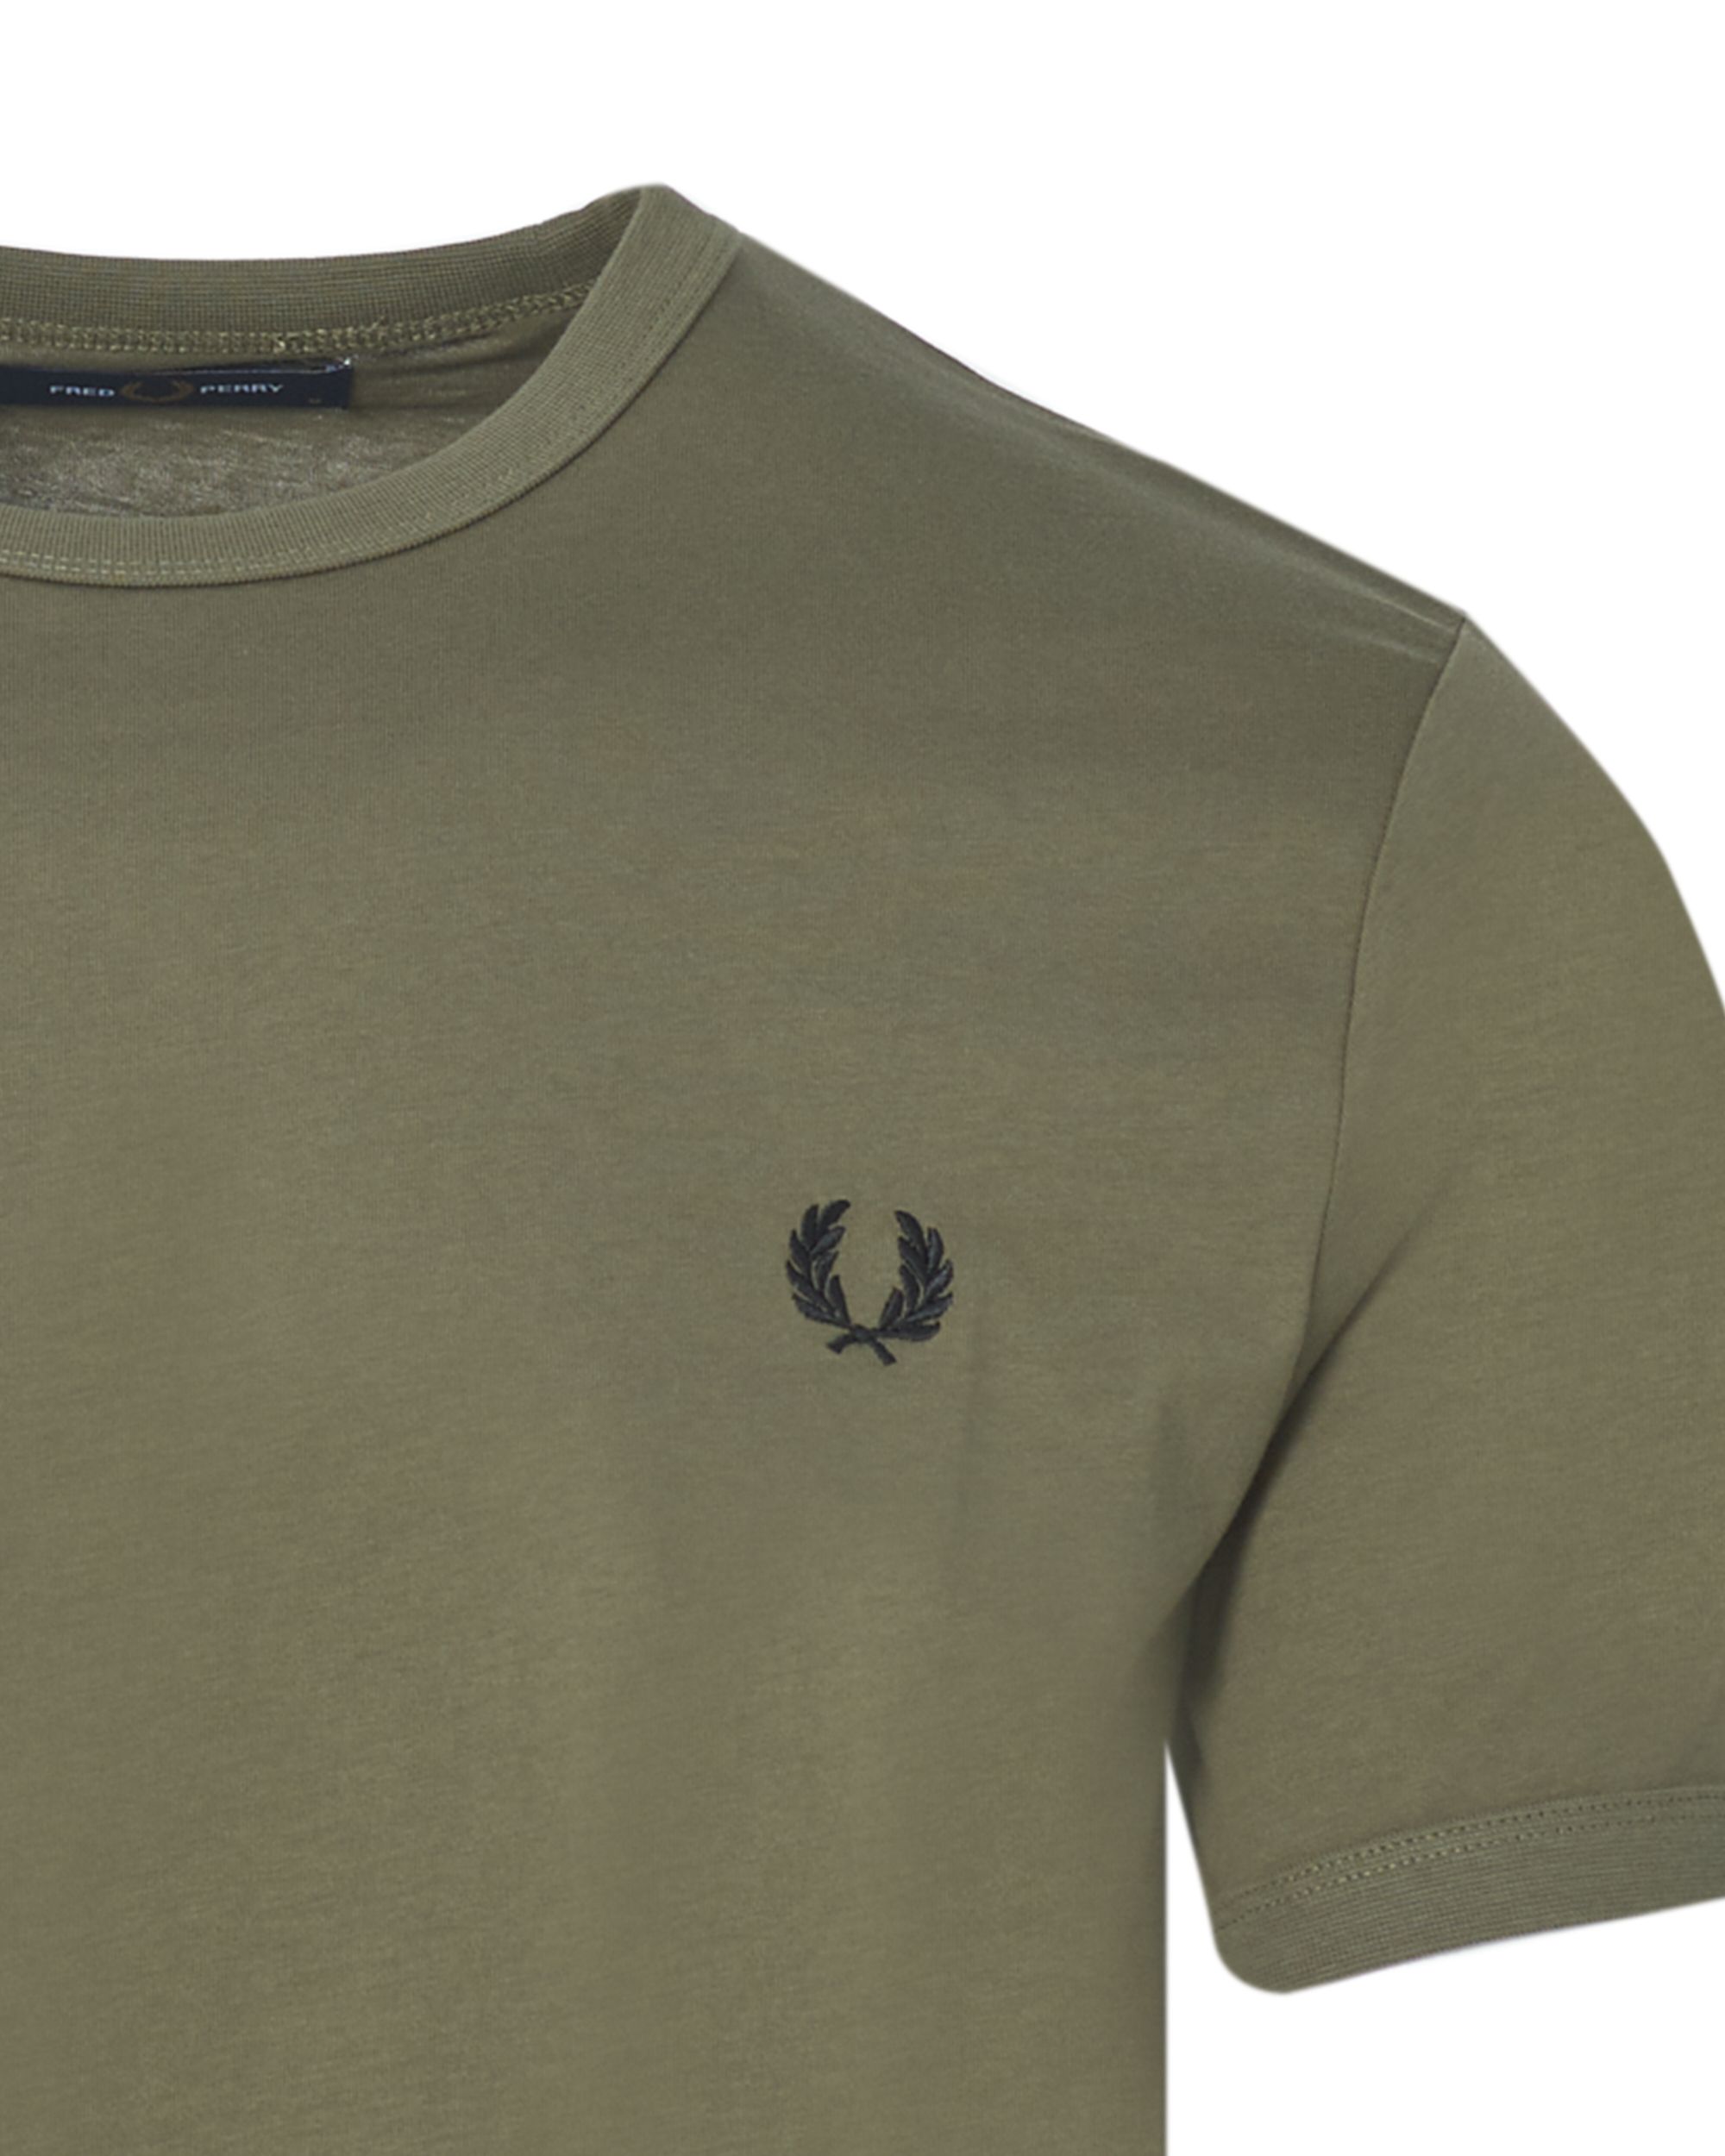 Fred Perry T-shirt KM Donker groen 083519-001-L